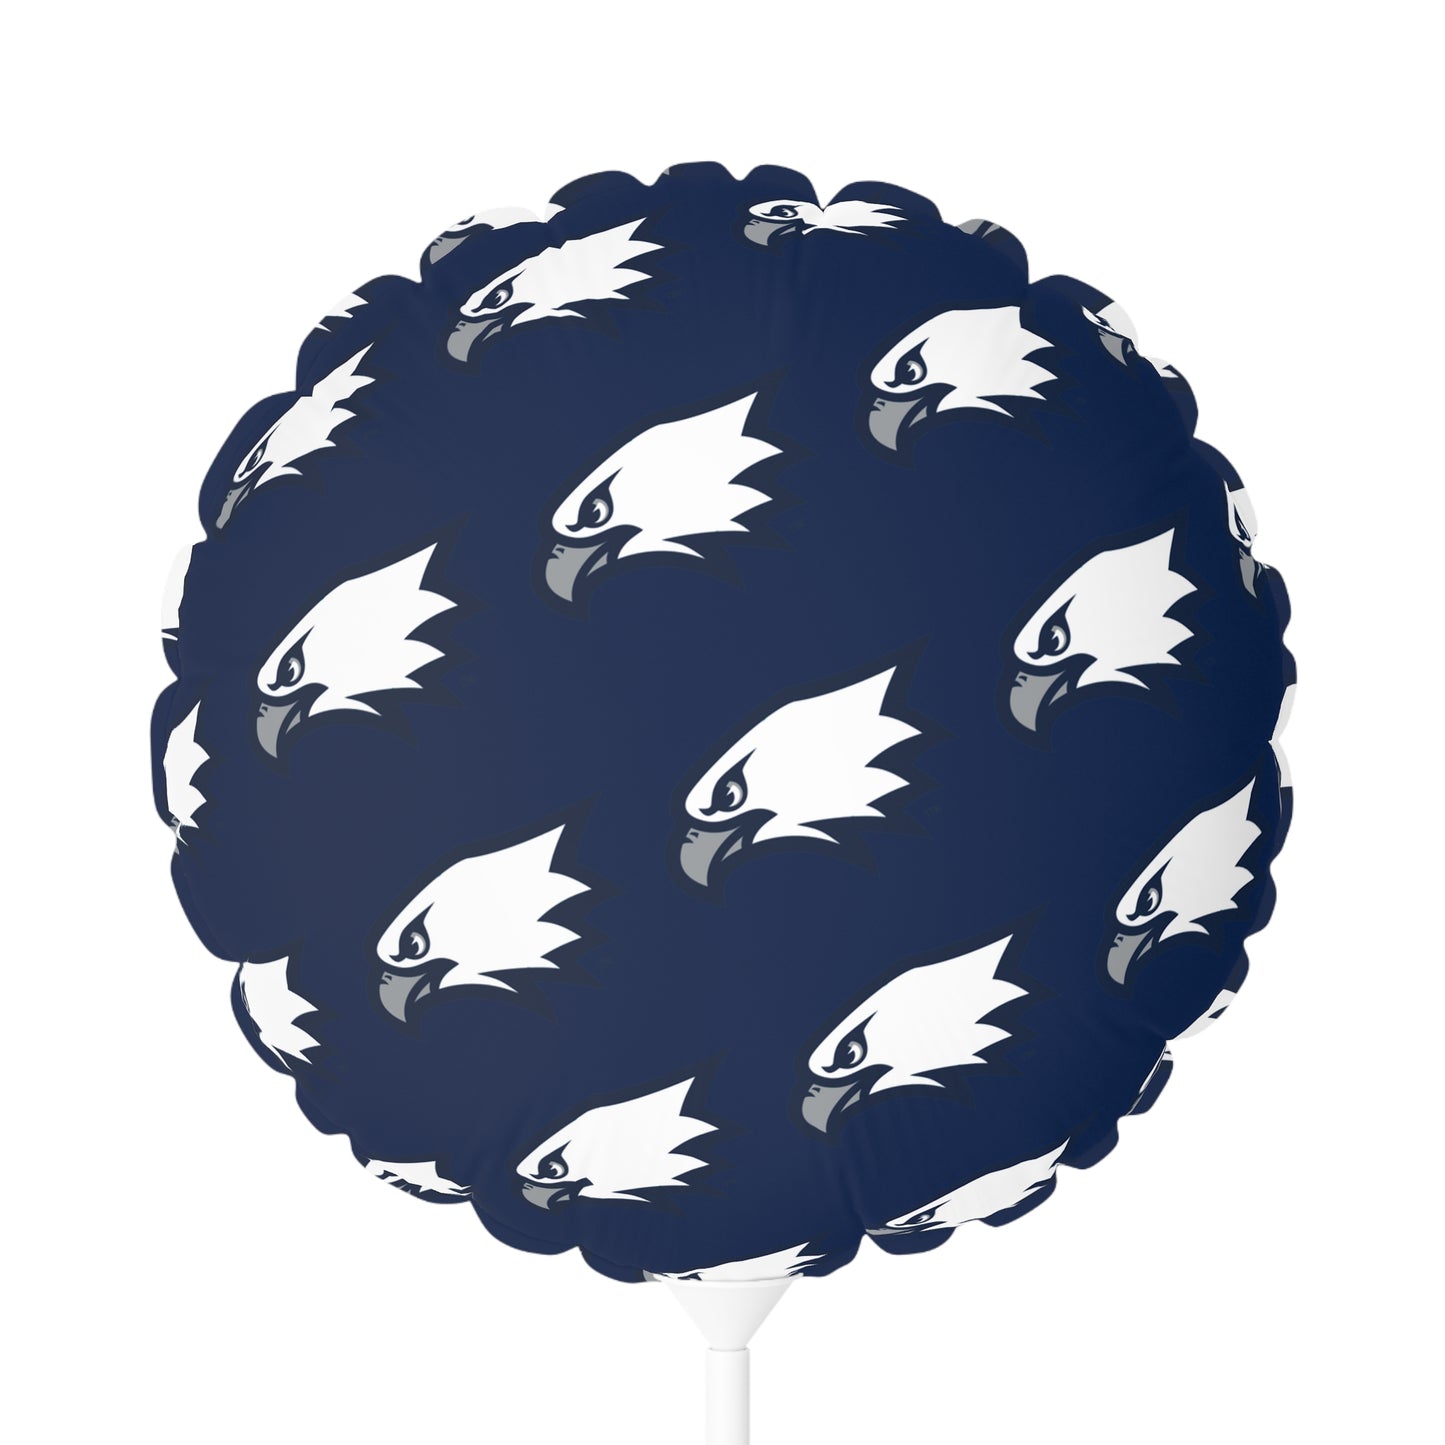 Duchesne Eagles Balloon (Round and Heart-shaped), 11"